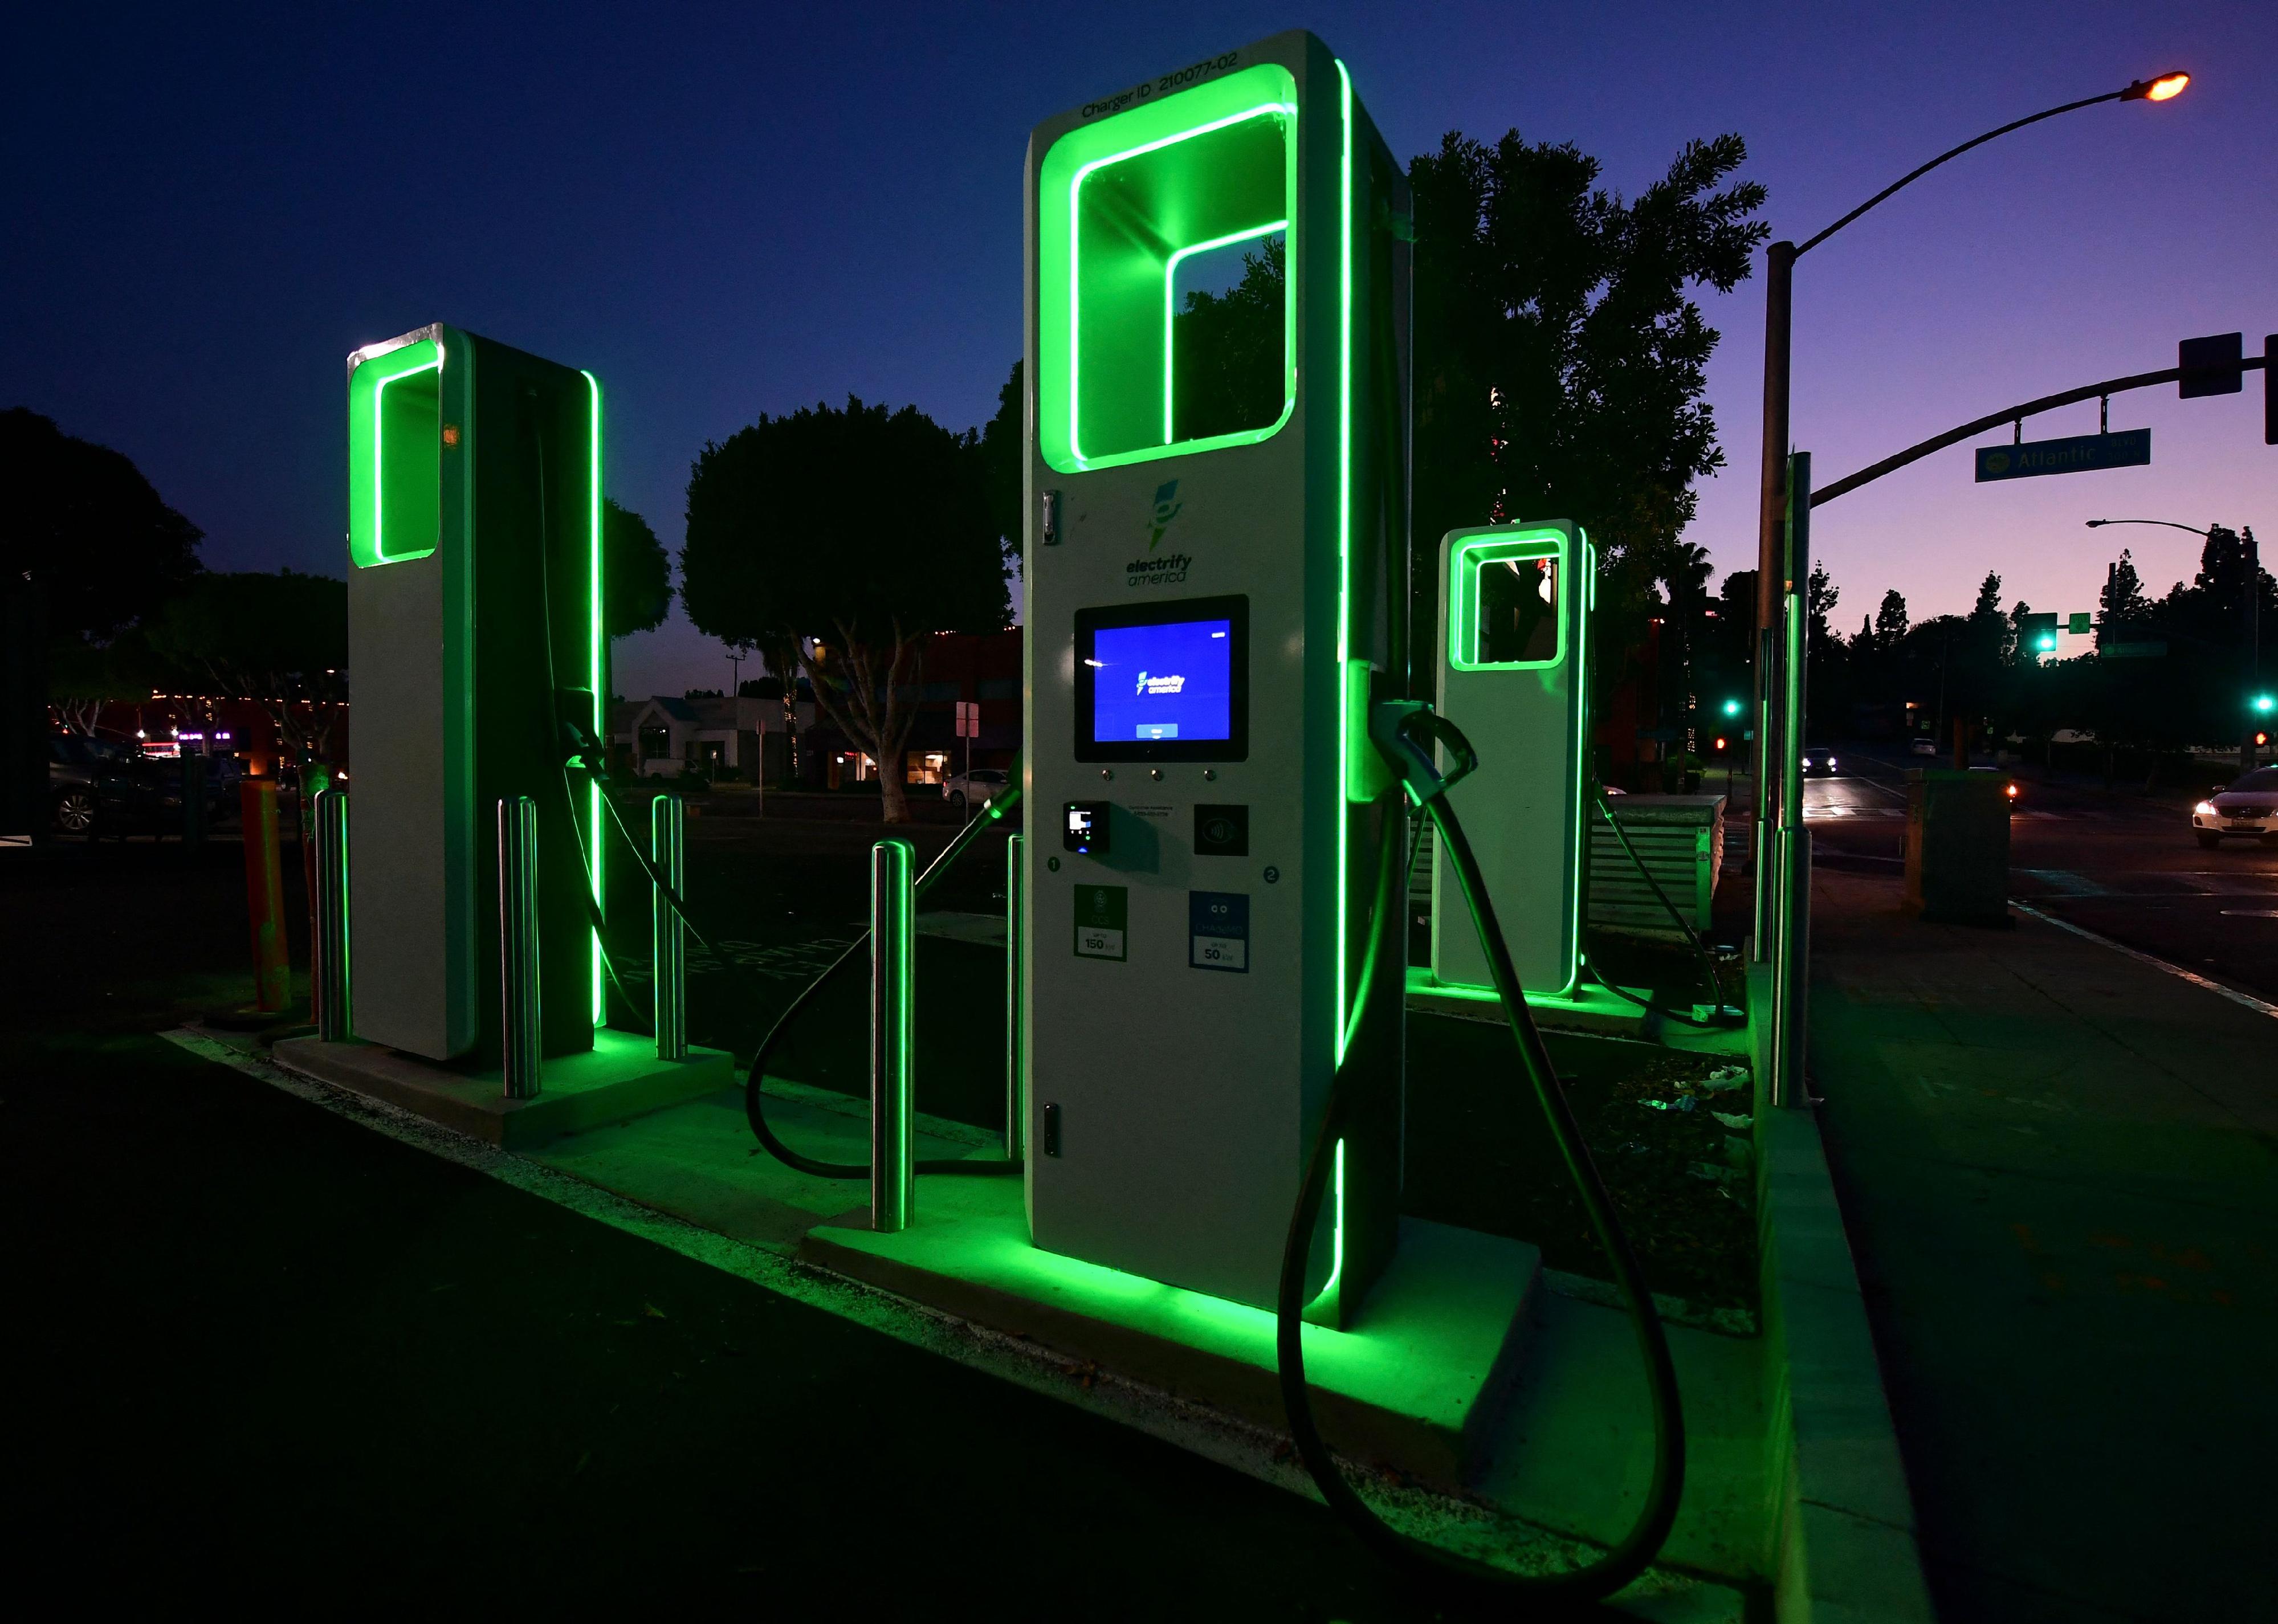 Electric vehicle charging station lit up in neon green at night.